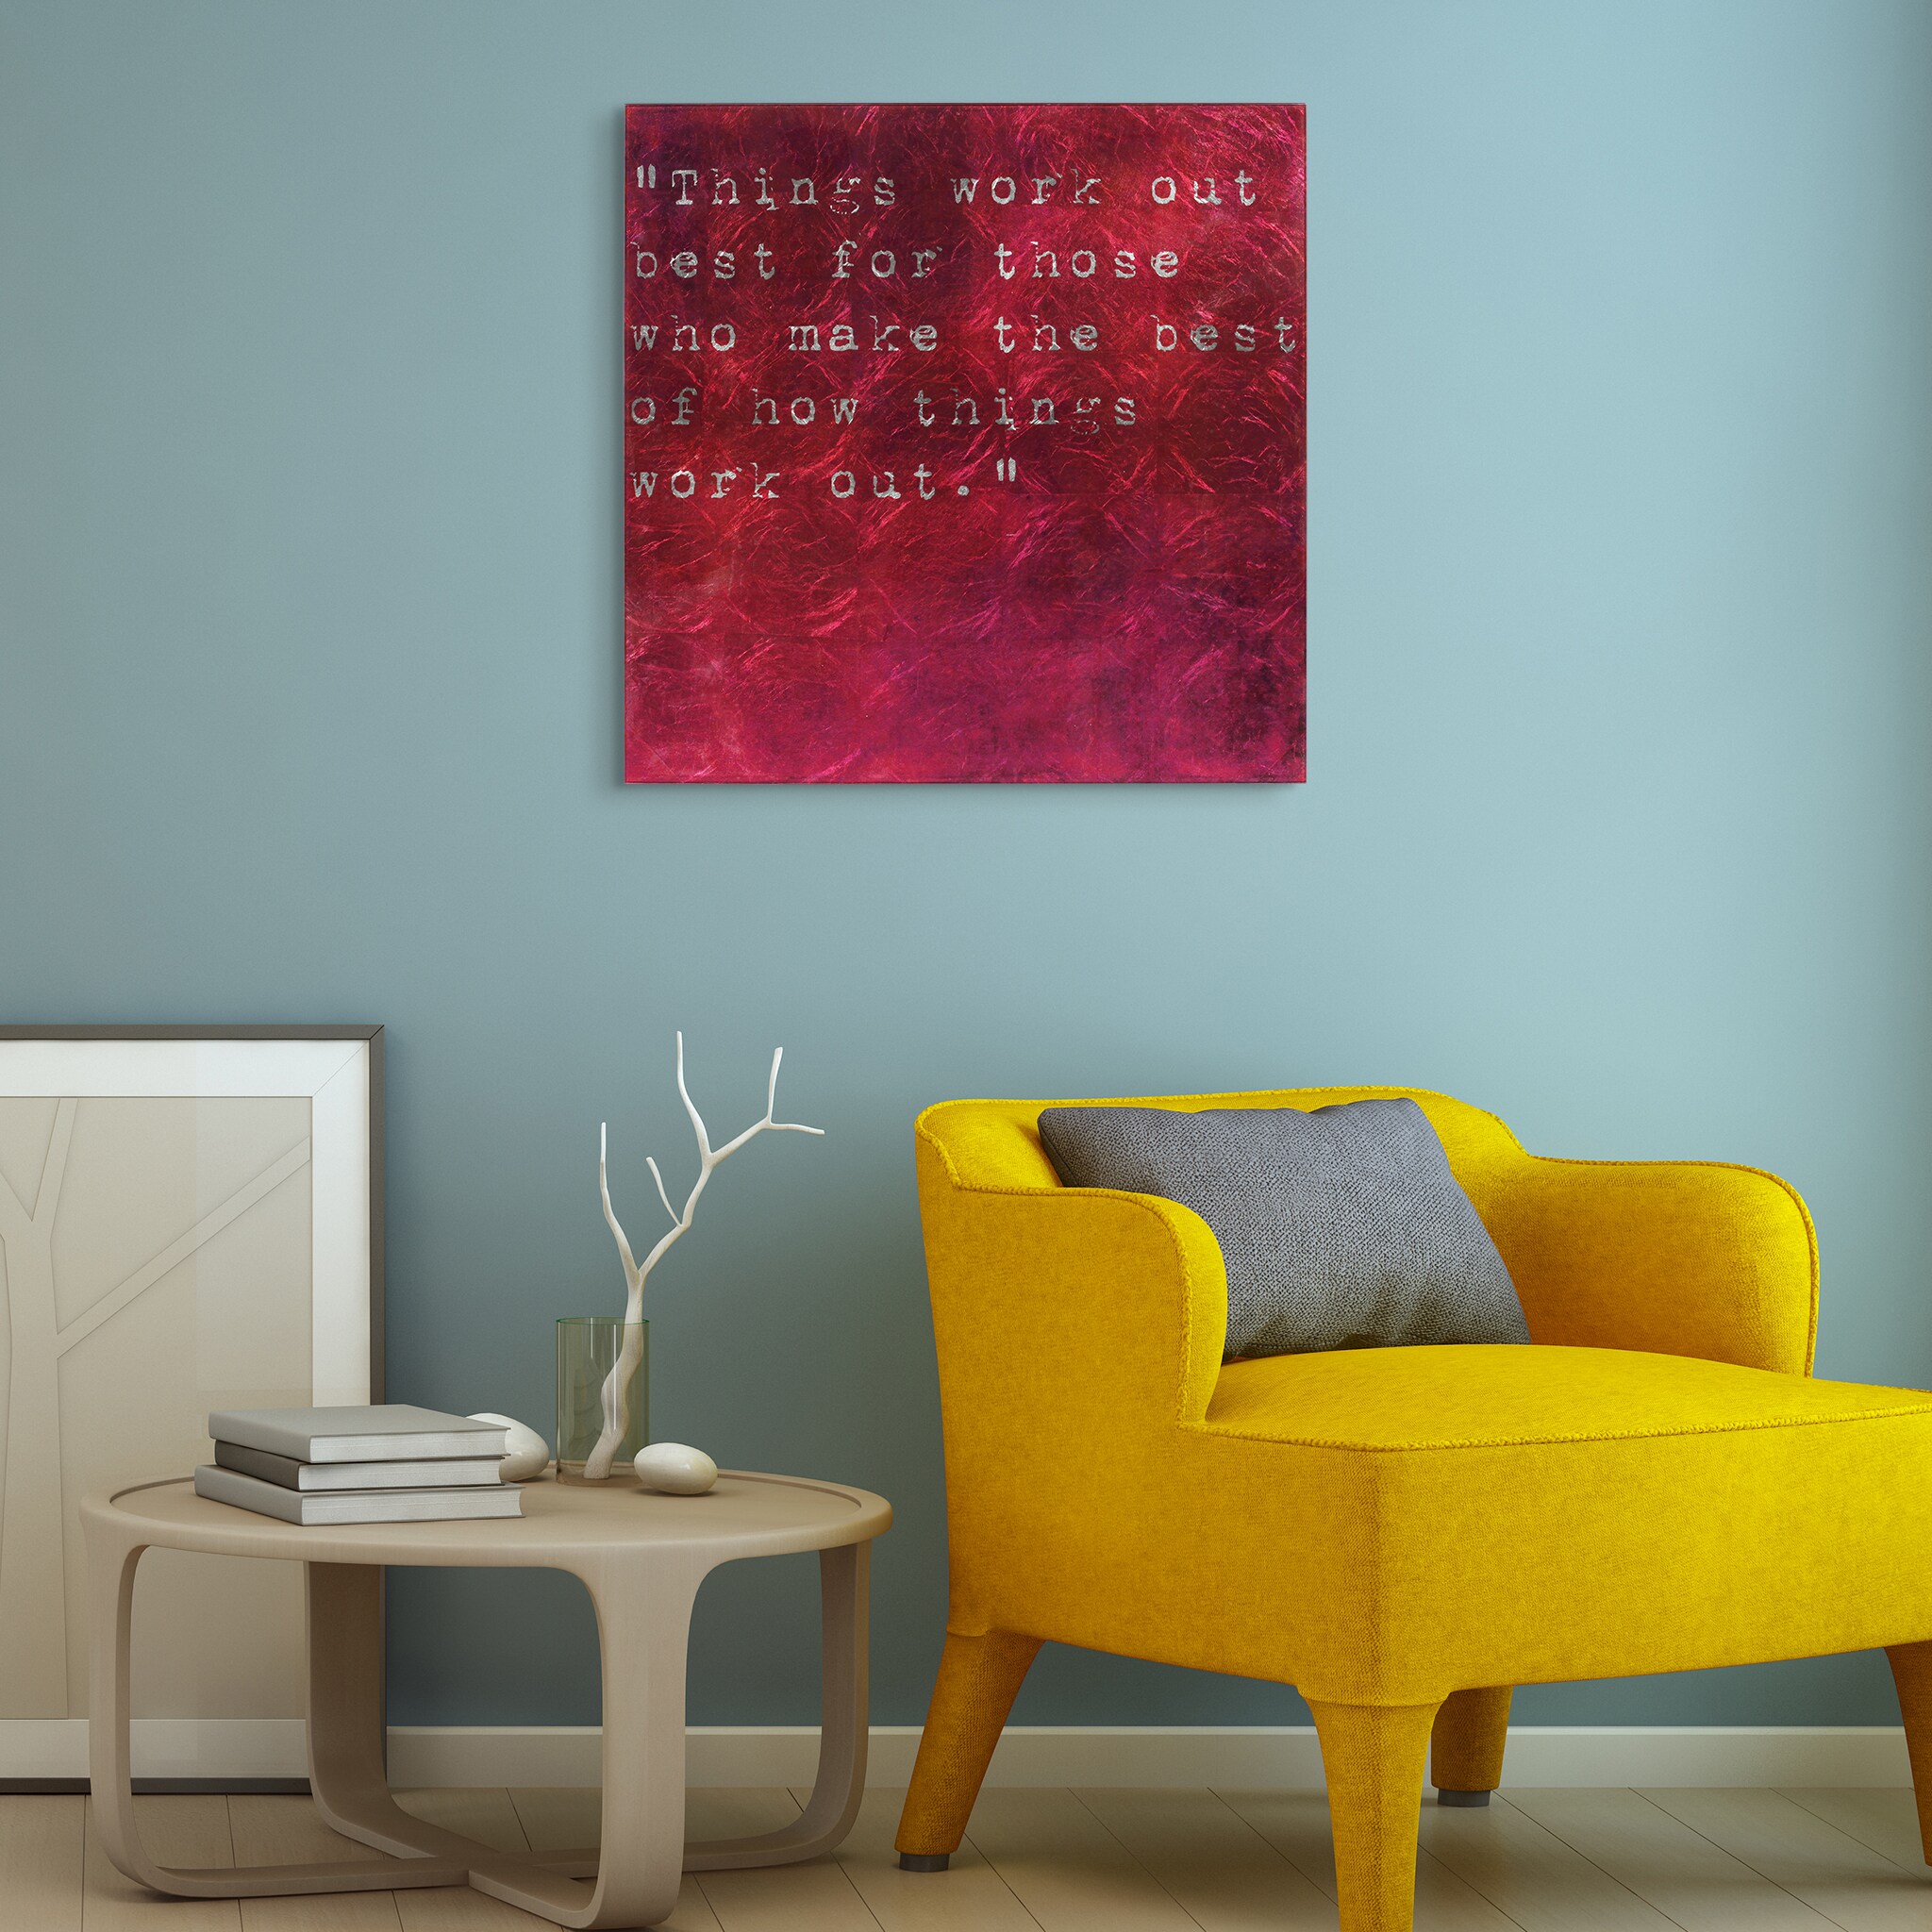 Empire Art Direct 24-in H x 24-in W Inspirational Glass Print at Lowes.com